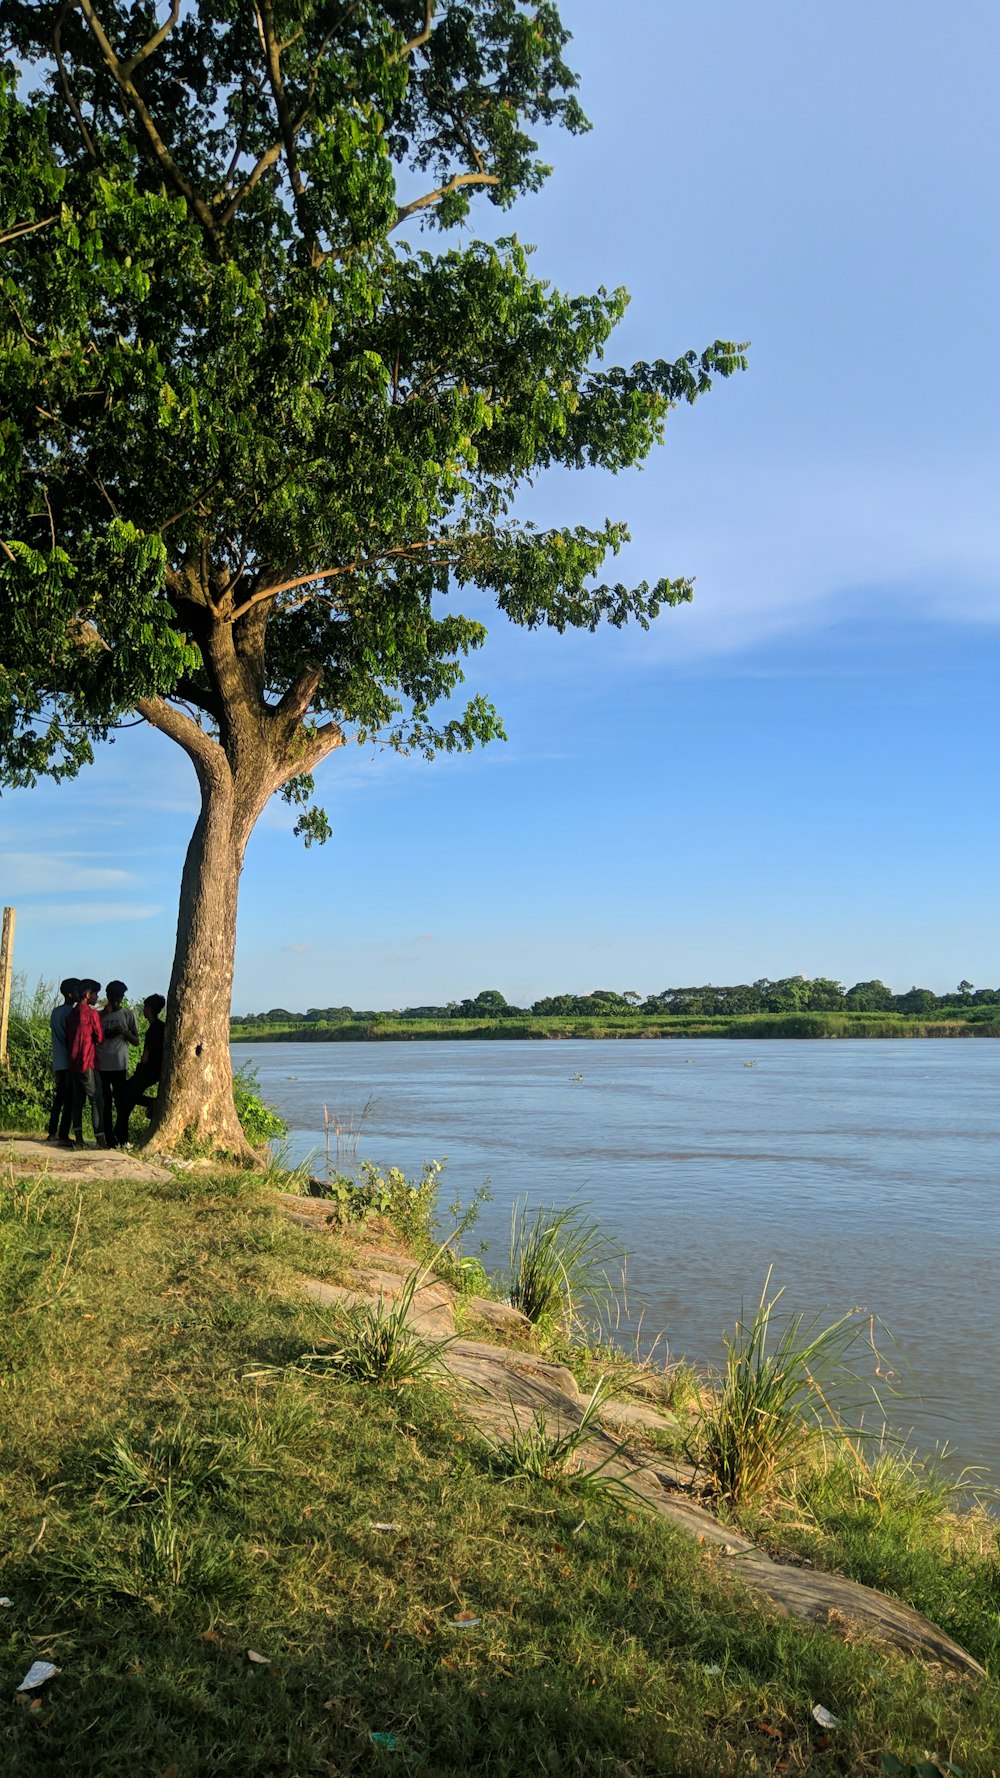 a group of people standing next to a tree near a body of water